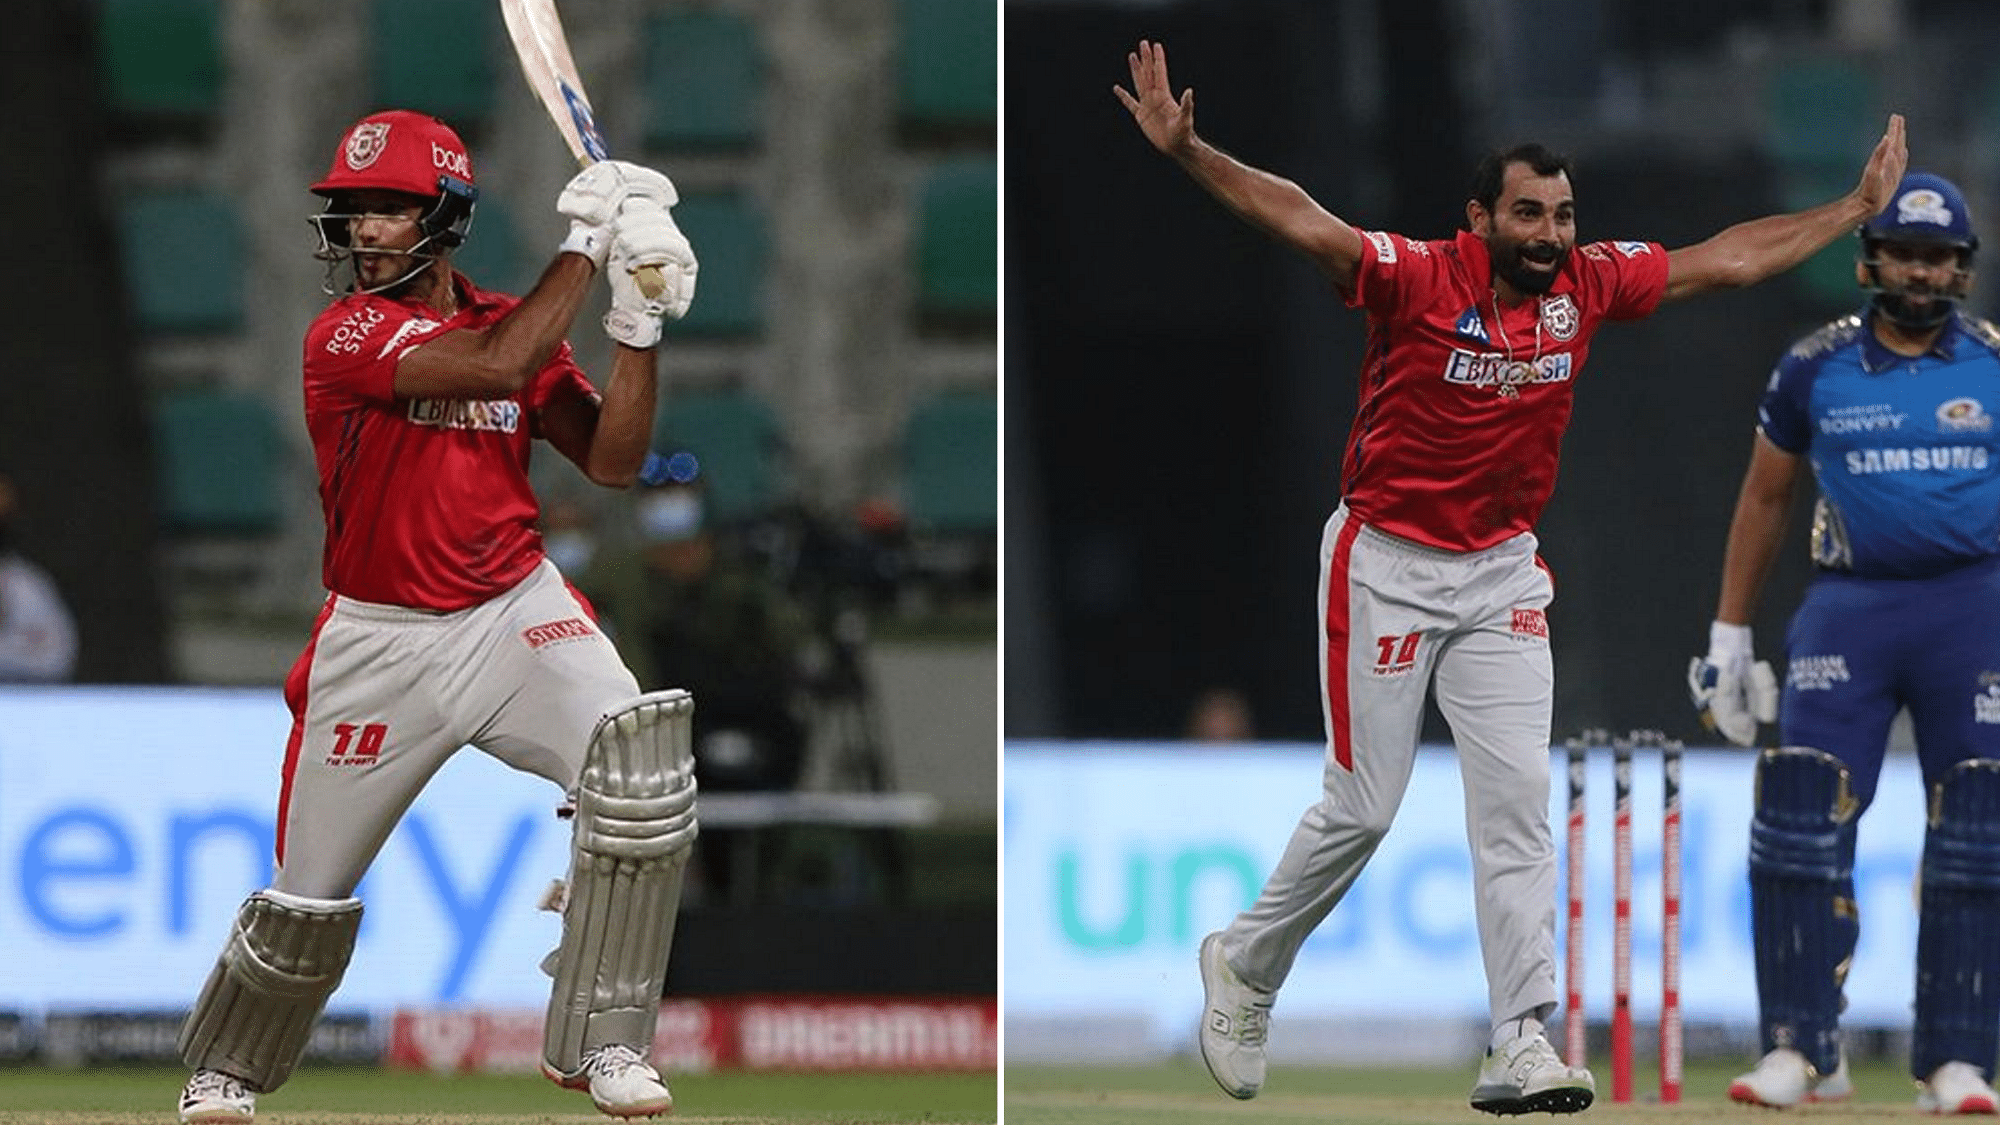 Kings XI Punjab duo of Mayank Agarwal and Mohammad Shami lead the races for Orange and Purple Caps, respectively